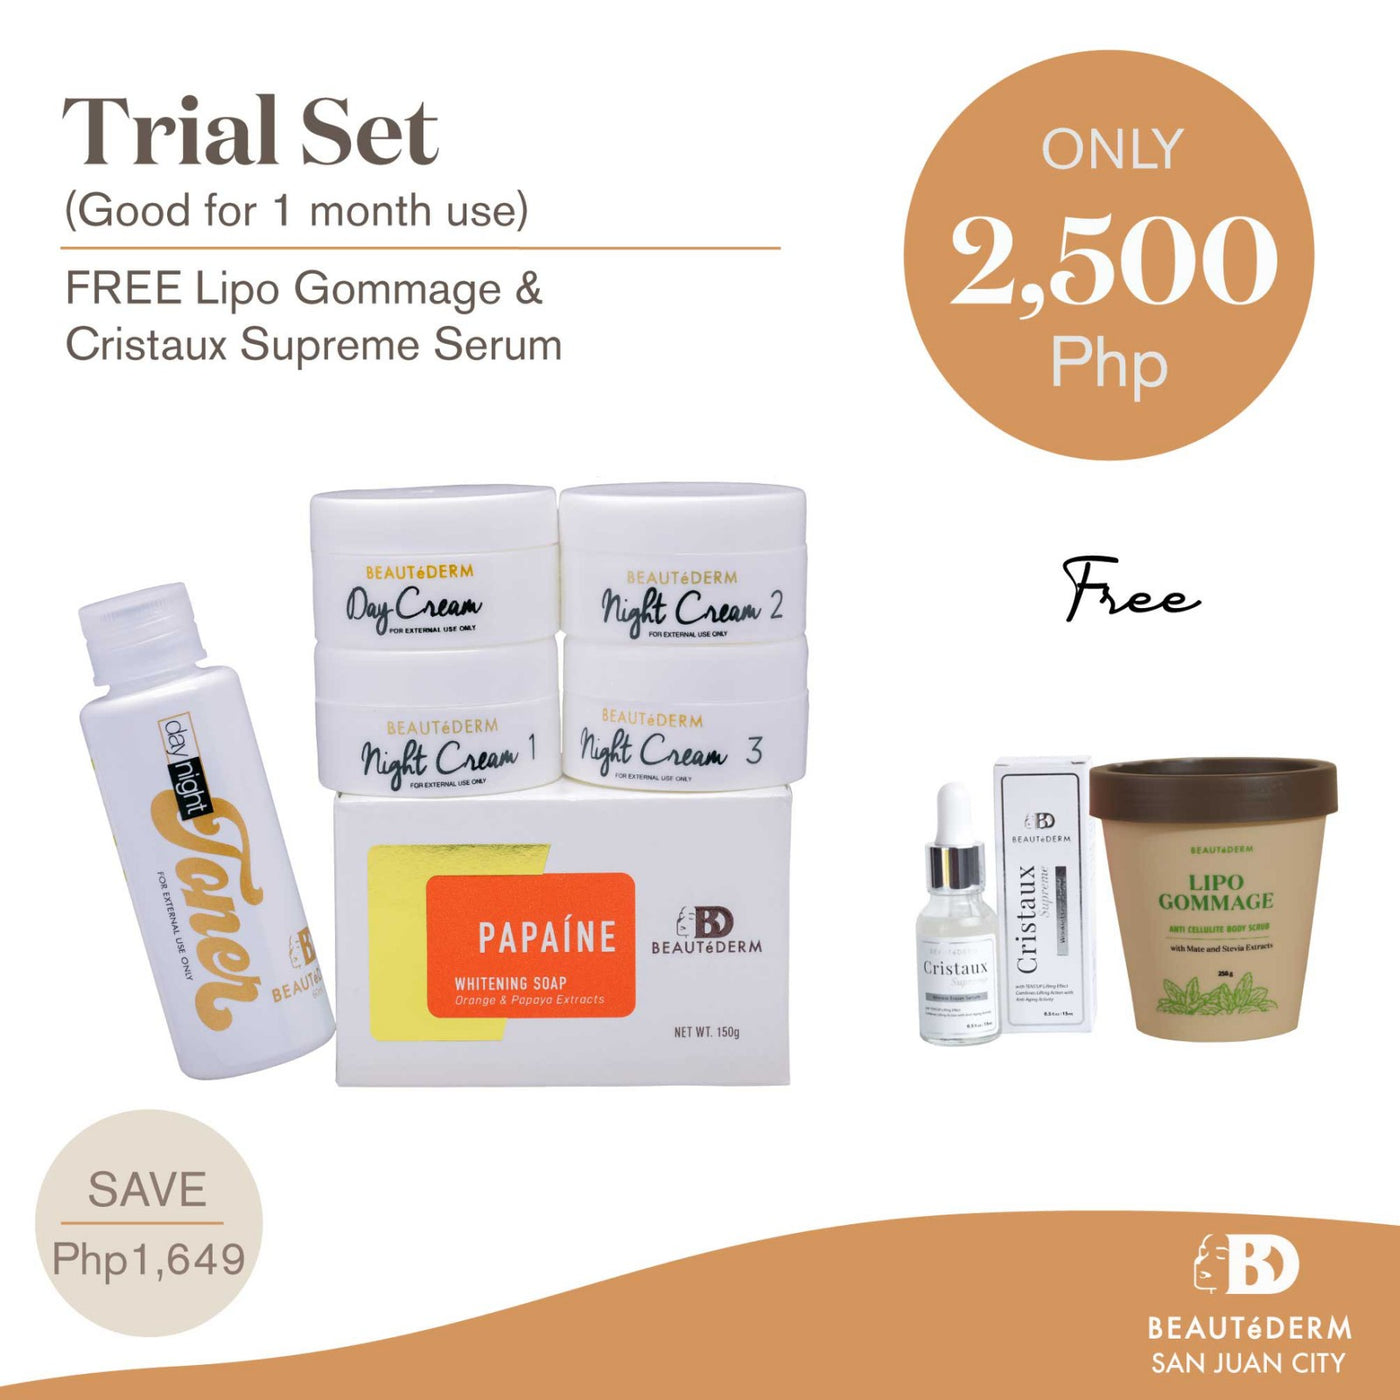 Beautederm Trial Set with Freebies